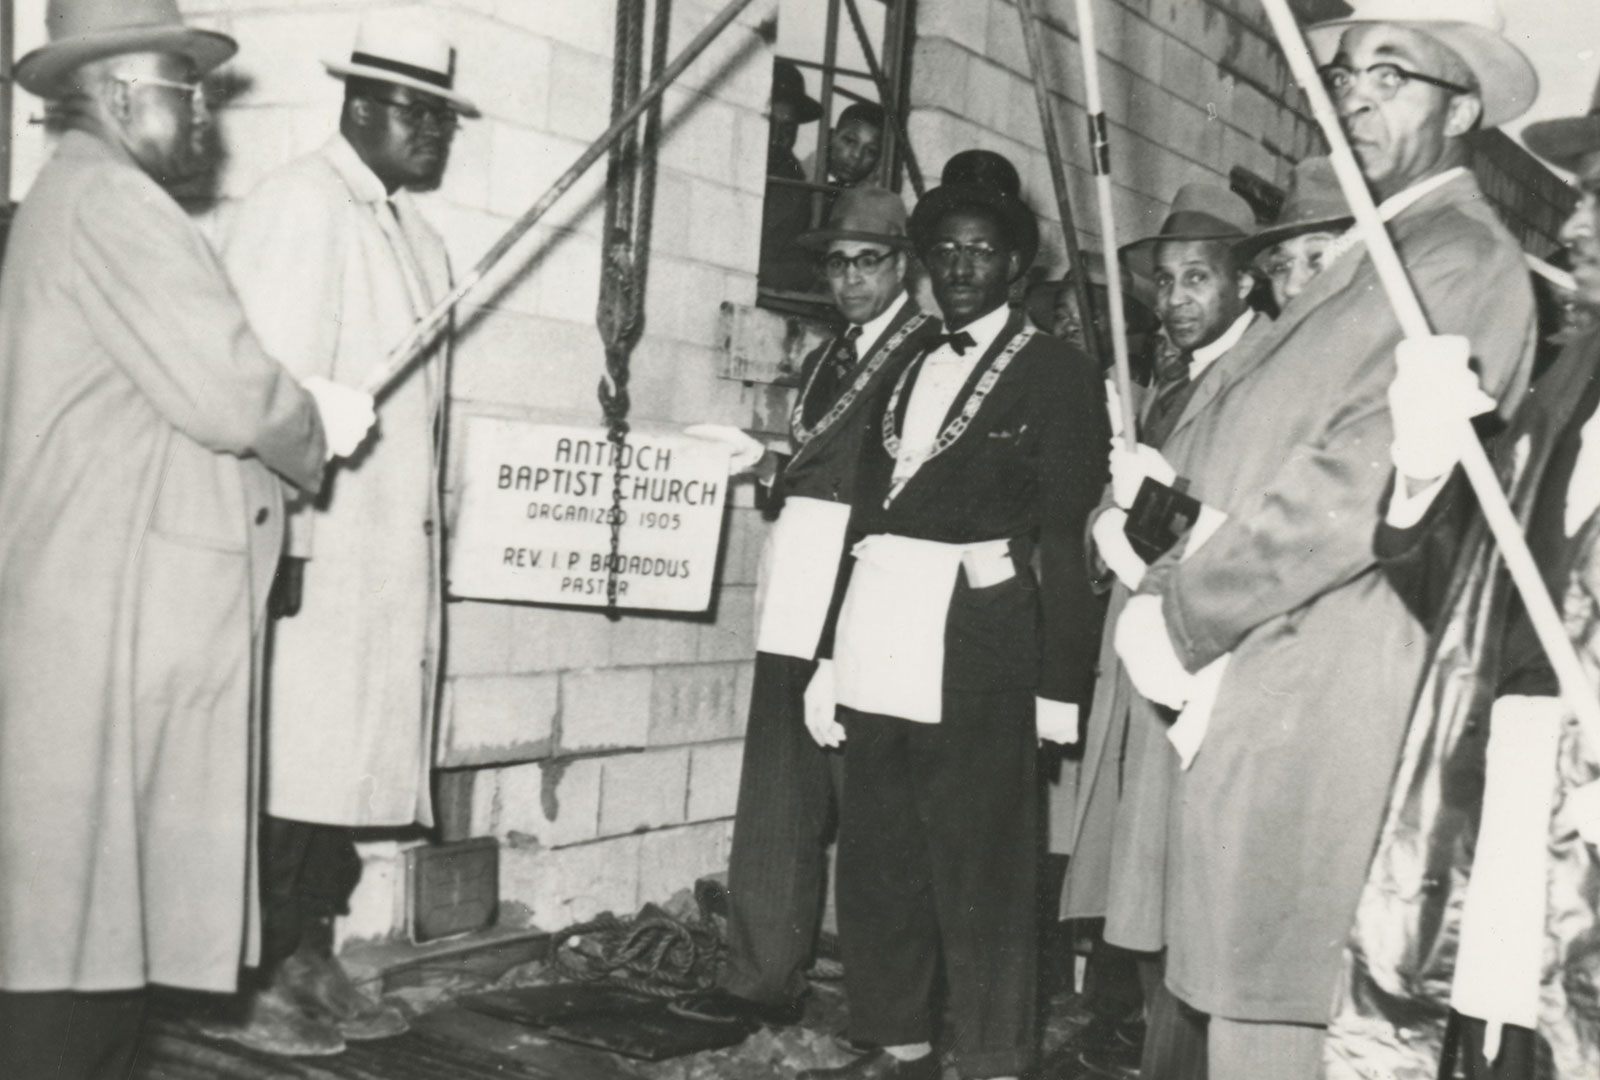 1953 photo of the cornerstone being laid at the Antioch Baptist Church.